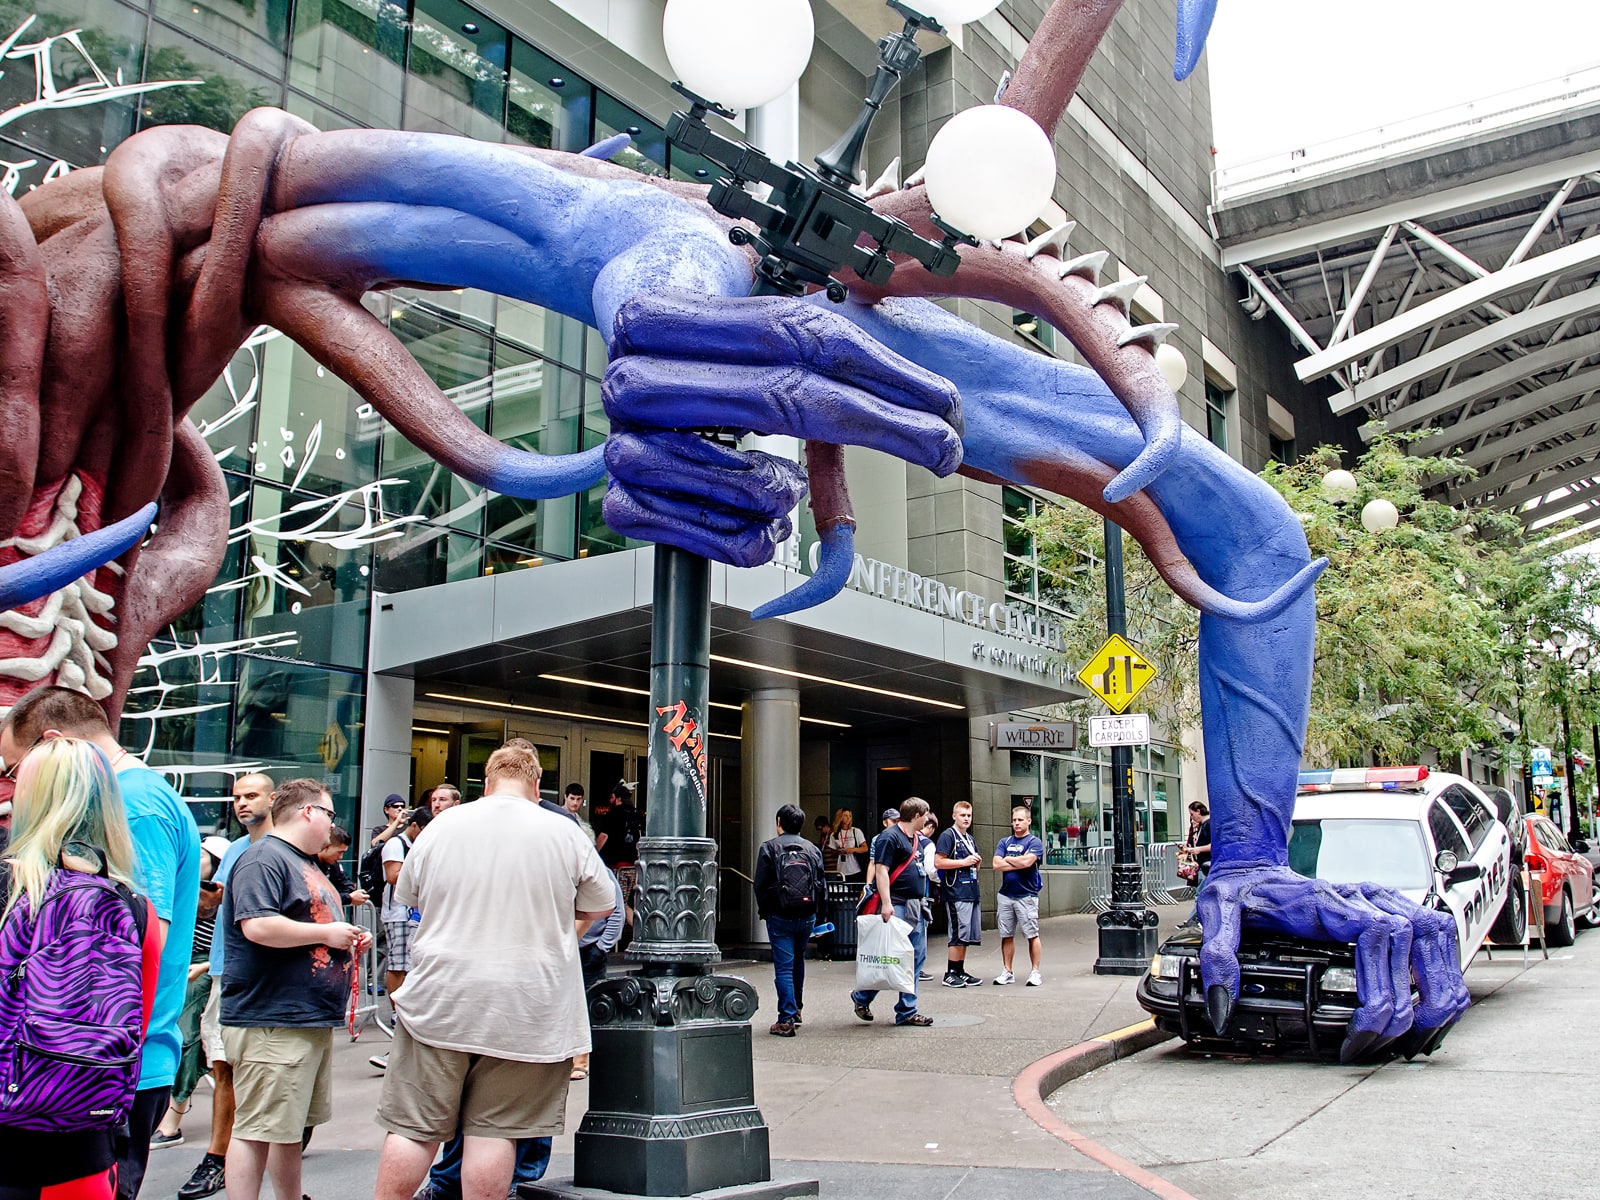 A huge clawed hand crushes a police car outside the Washington State Convention Center for PAX 2015